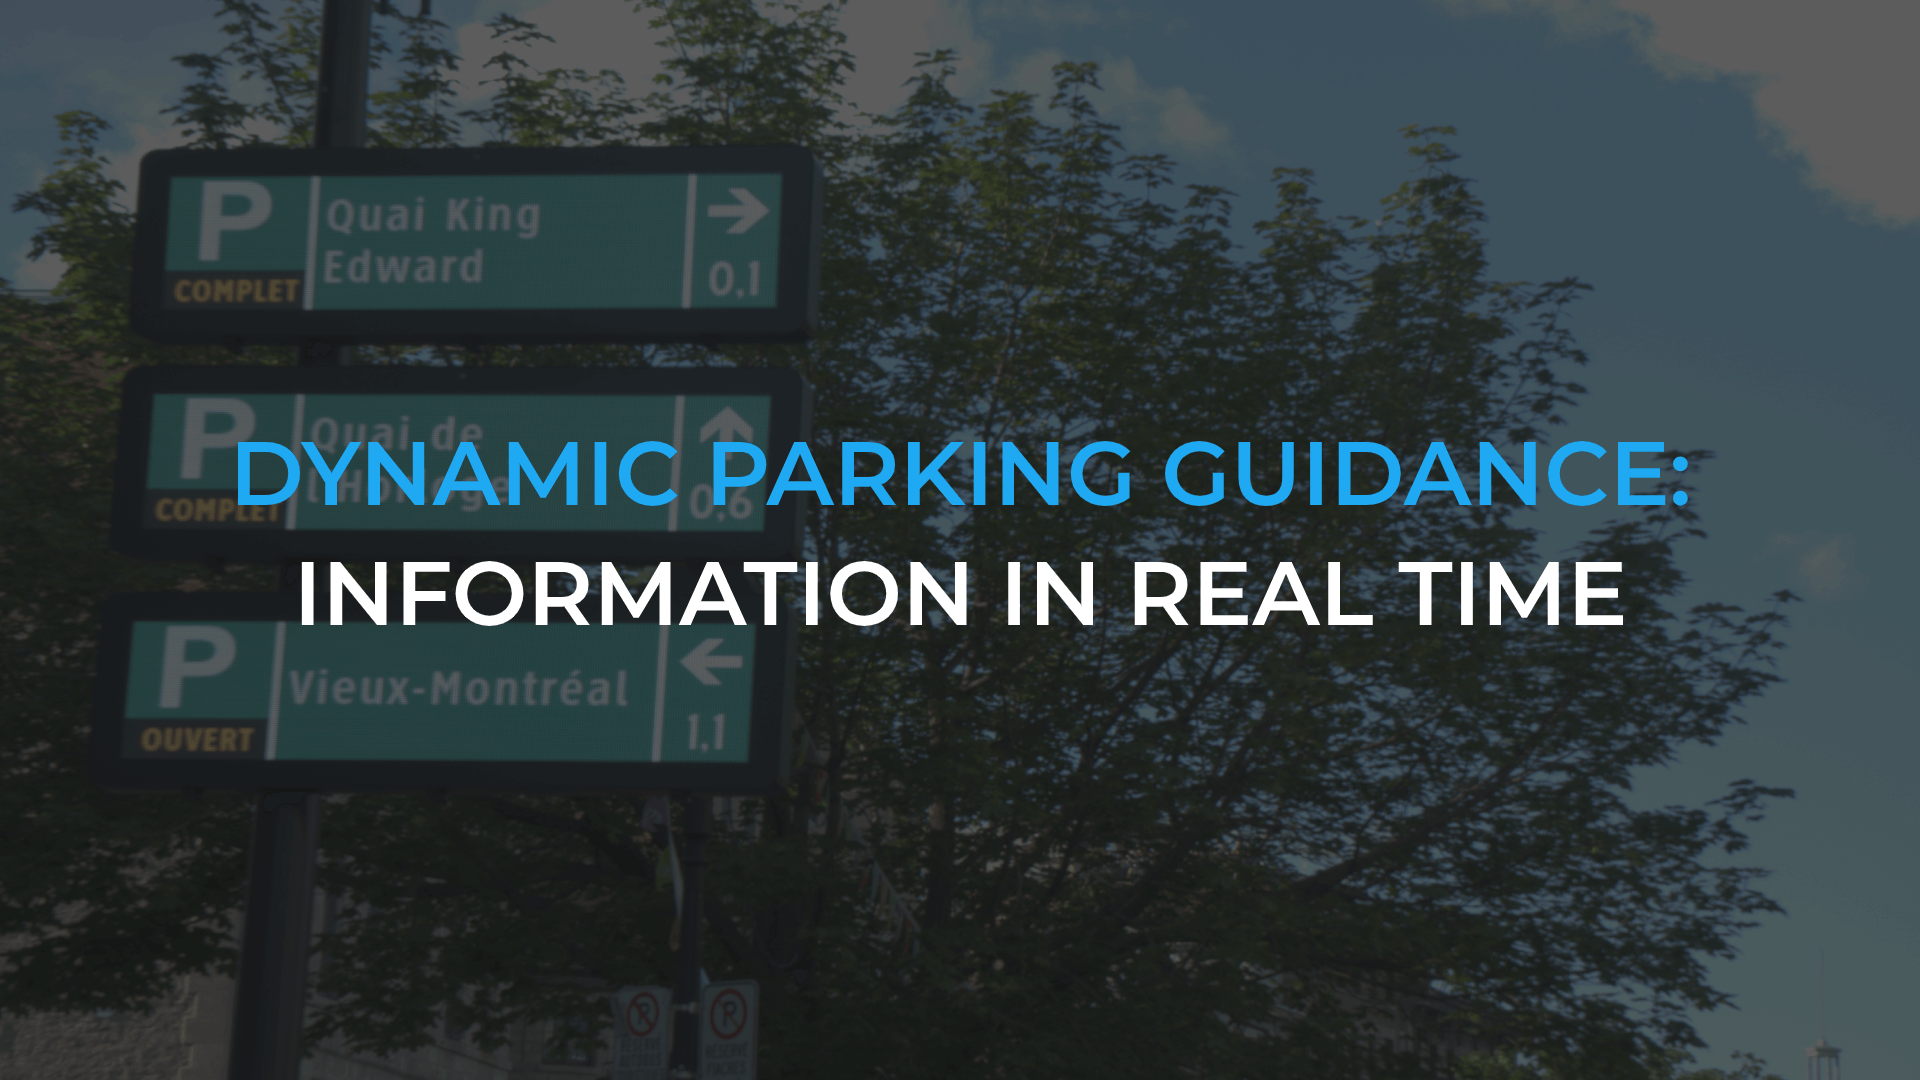 The evolution of dynamic parking guidance: A tool for citizen communications